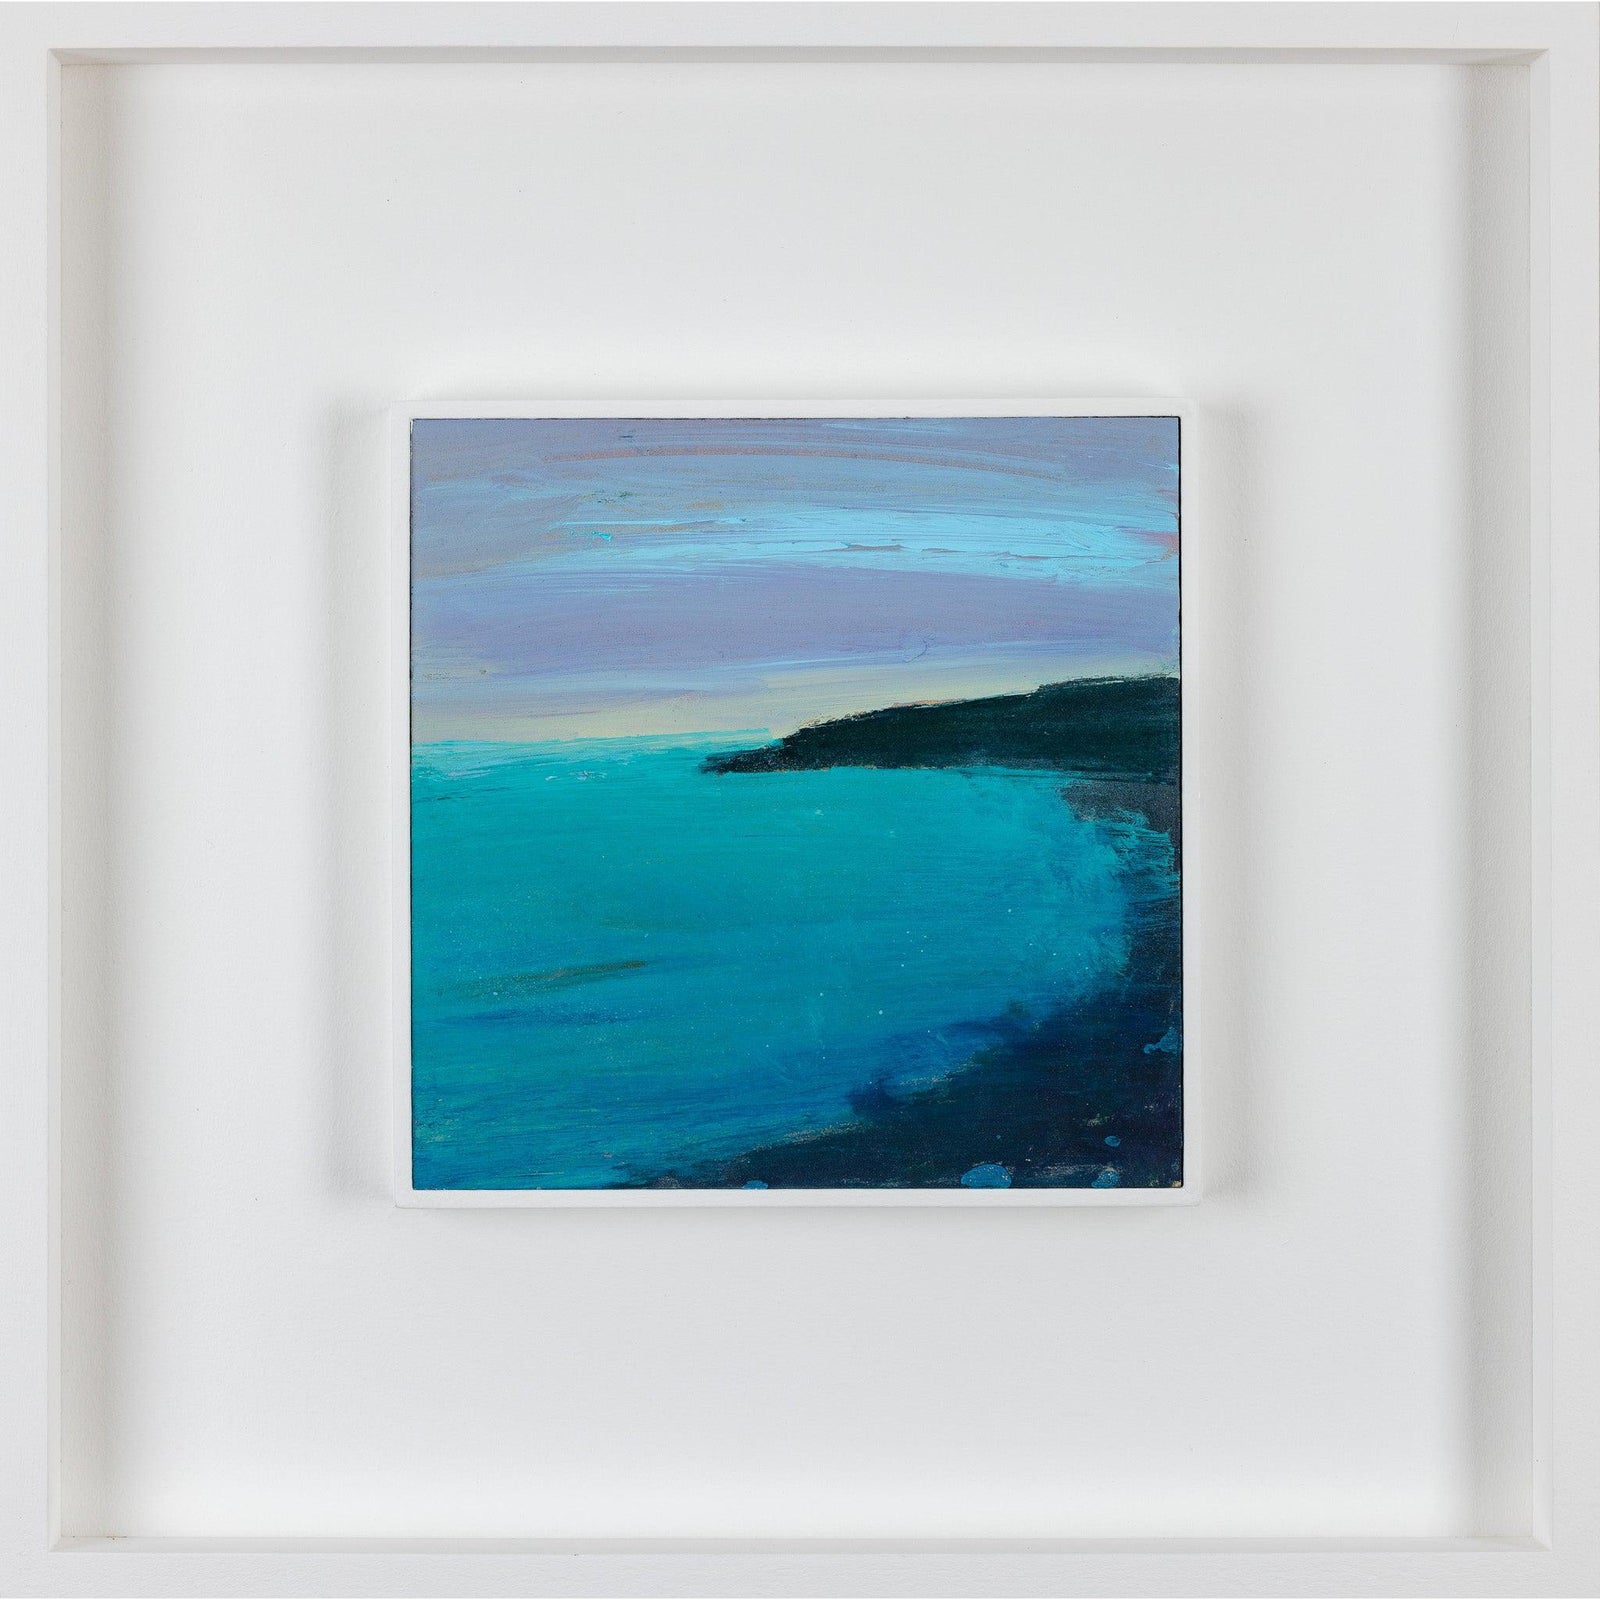 'Sea Breeze' mixed media framed original by Alex Yarlett, available at Padstow Gallery, Cornwall